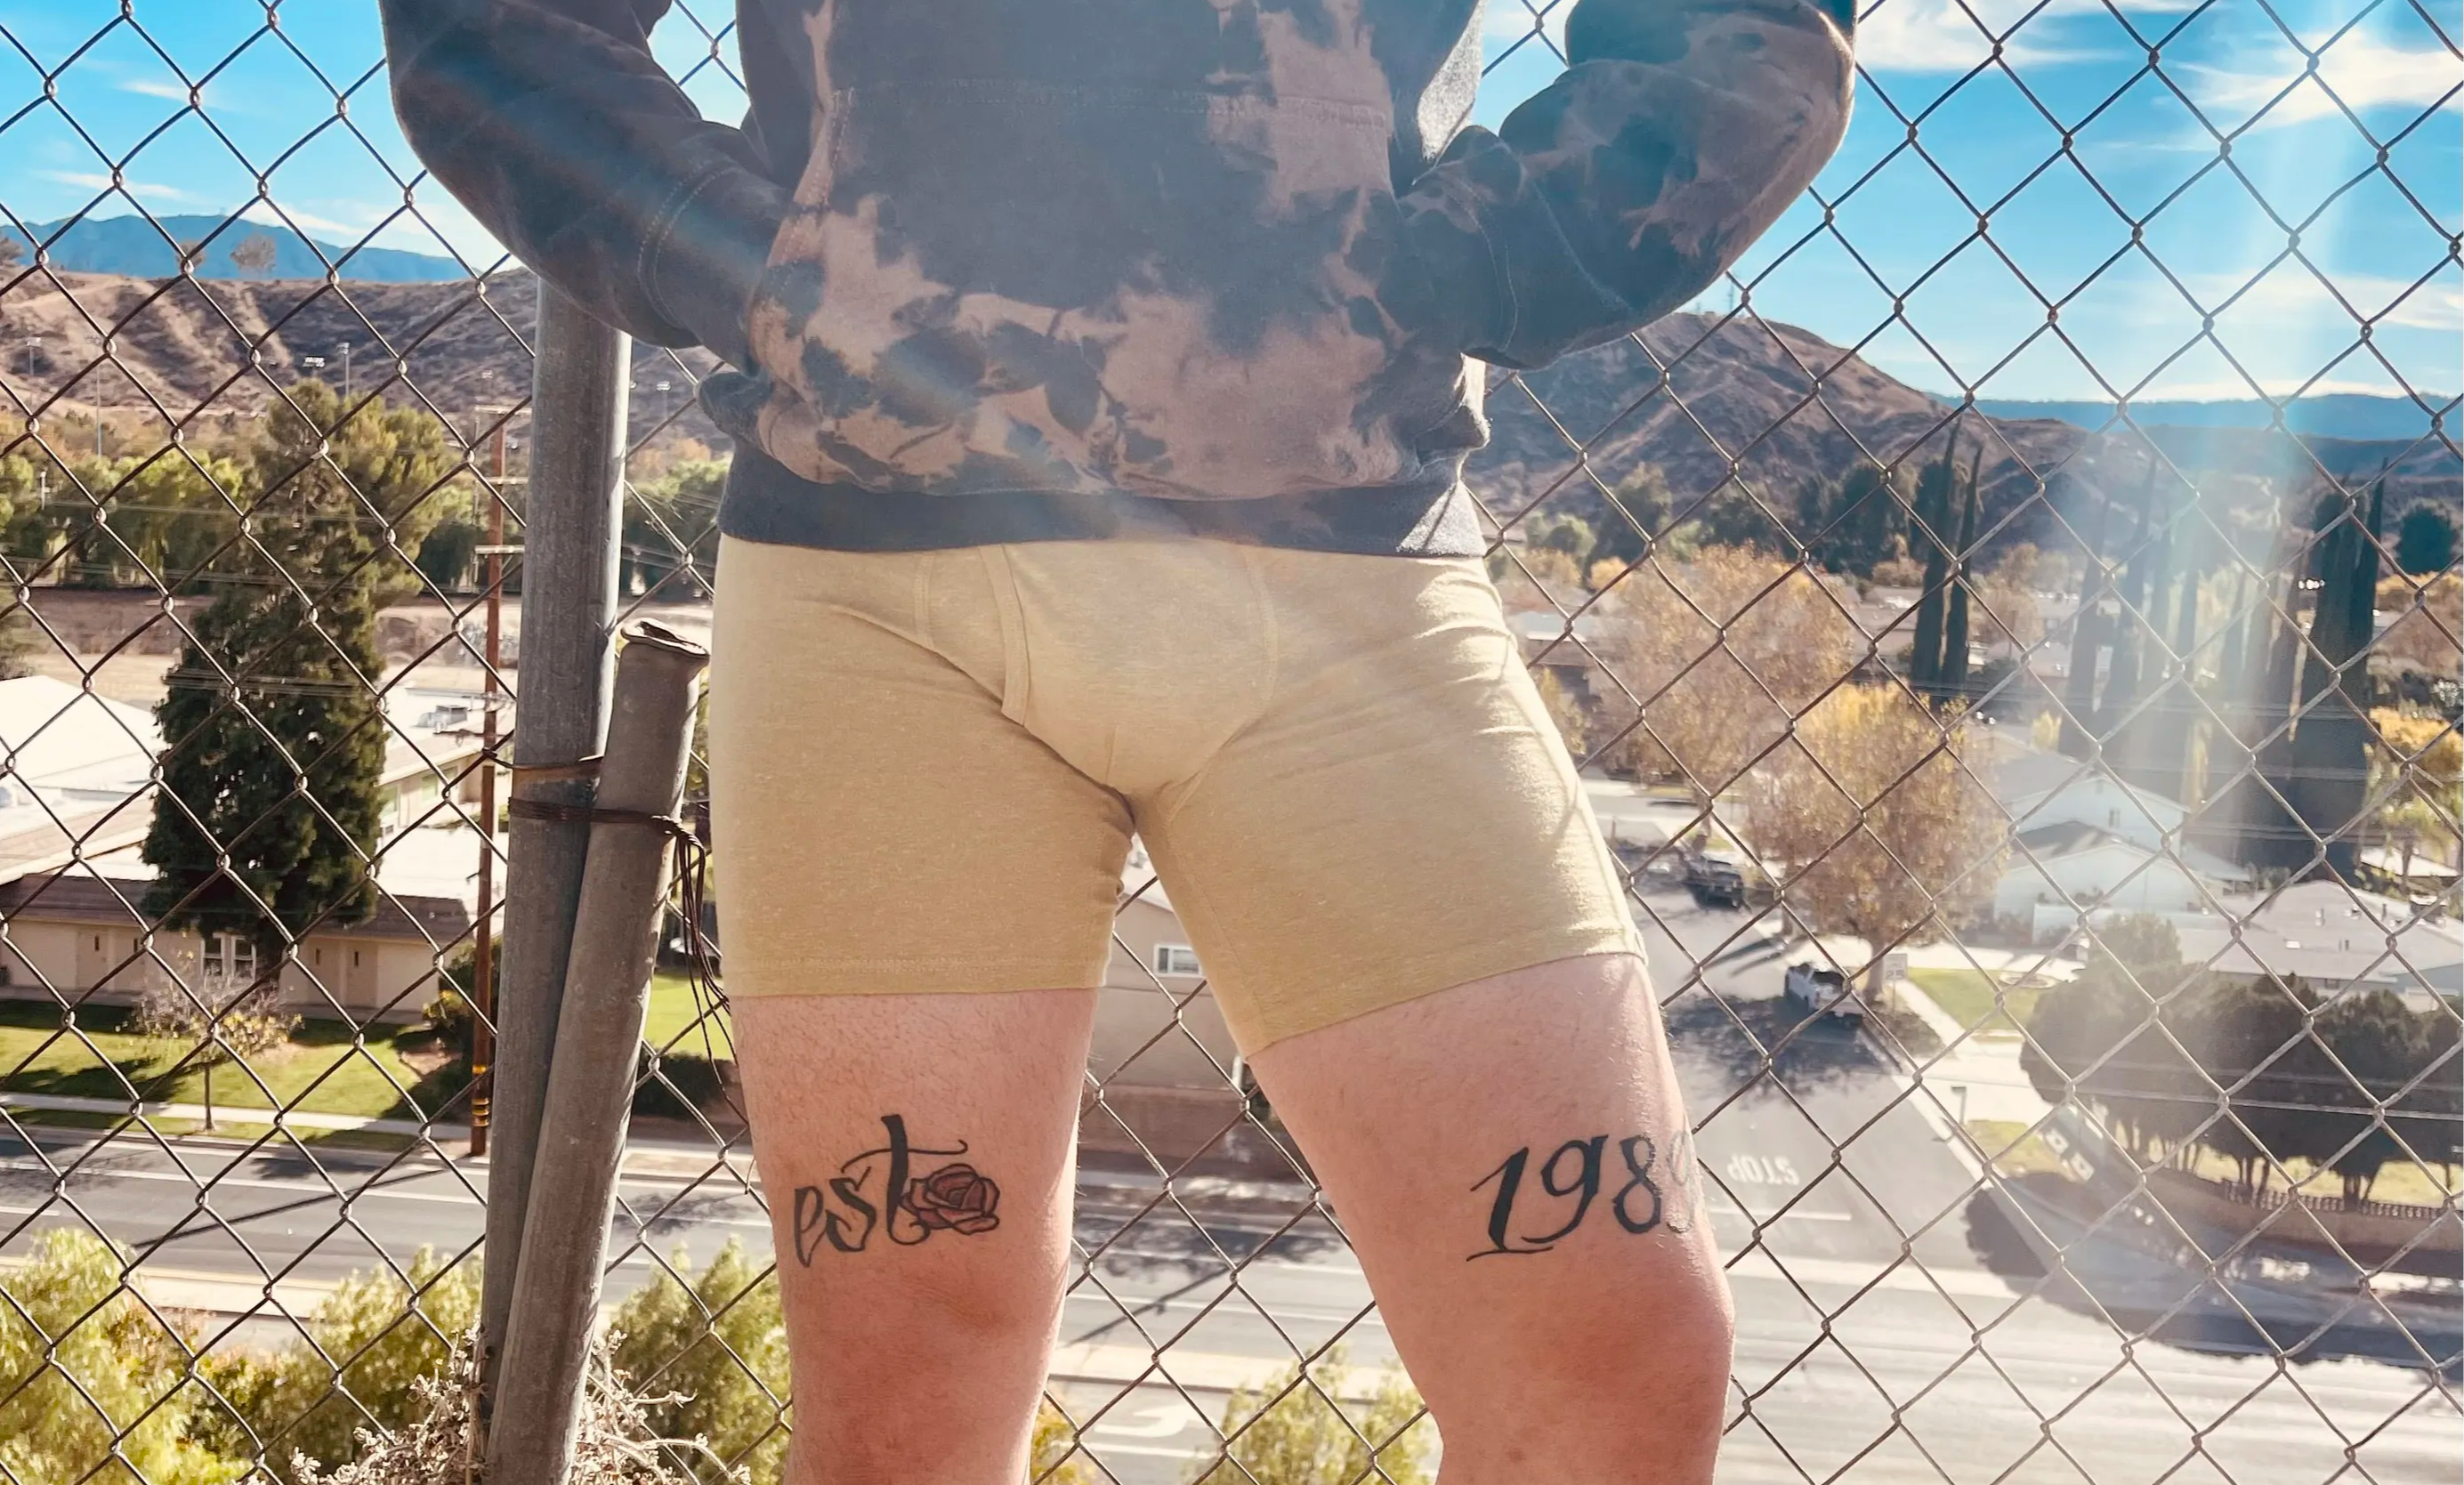 man in nude boxers leans against chain link fence